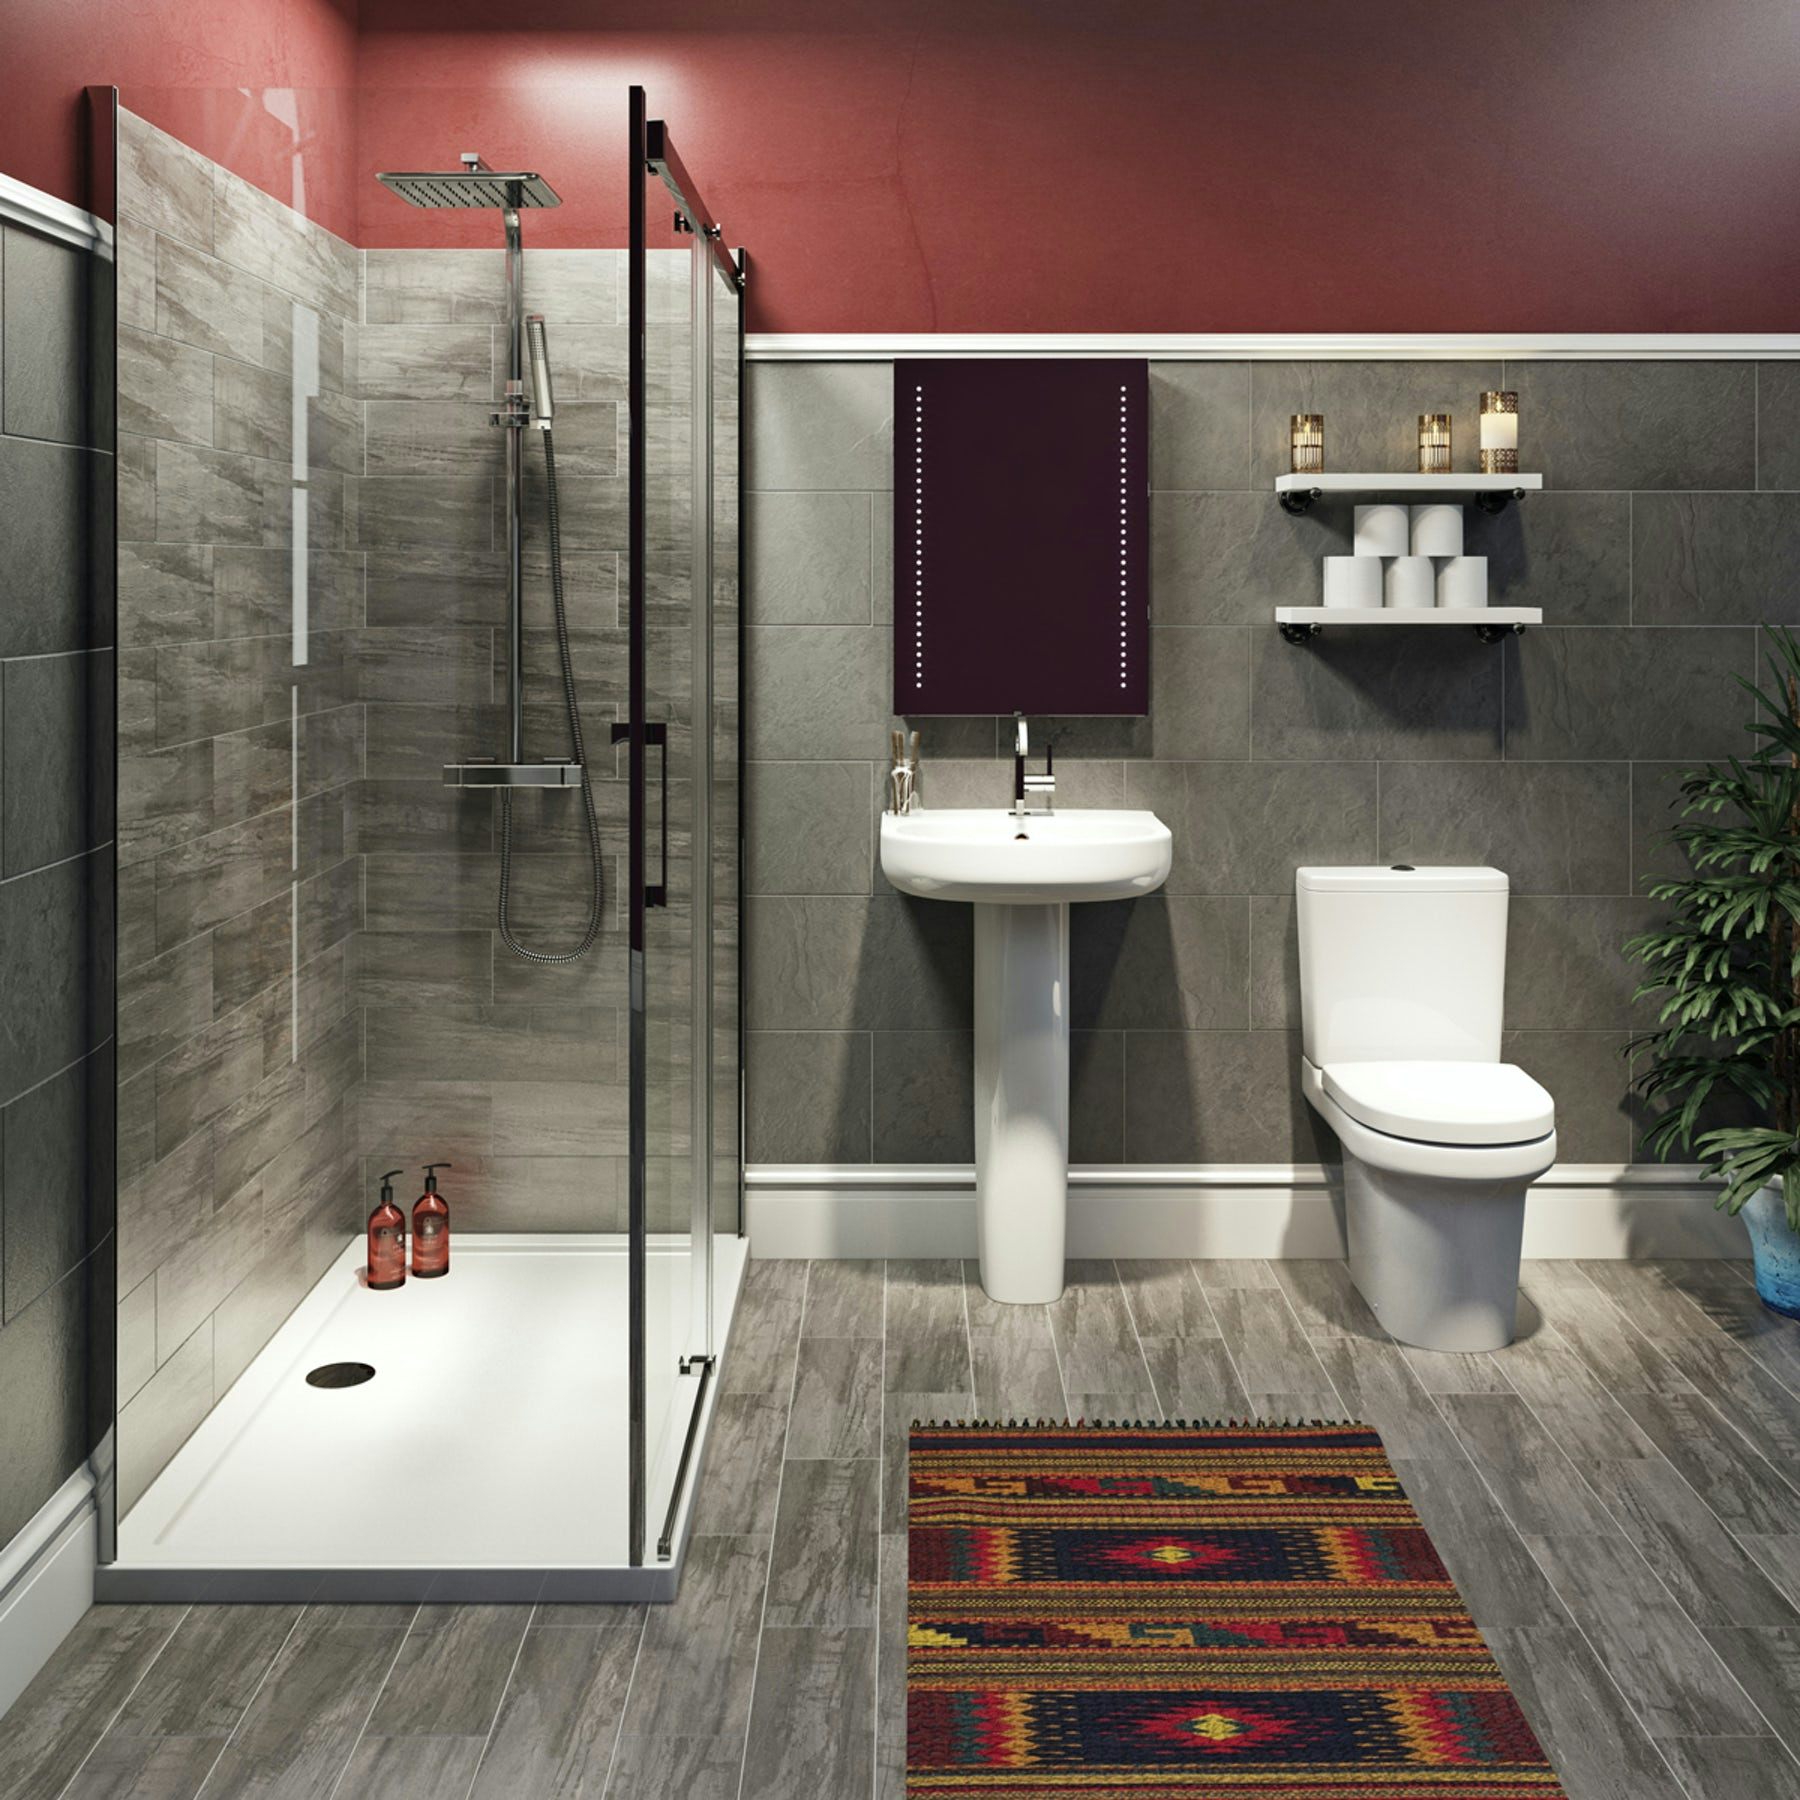 Mode Burton complete bathroom suite with enclosure, tray, shower and taps